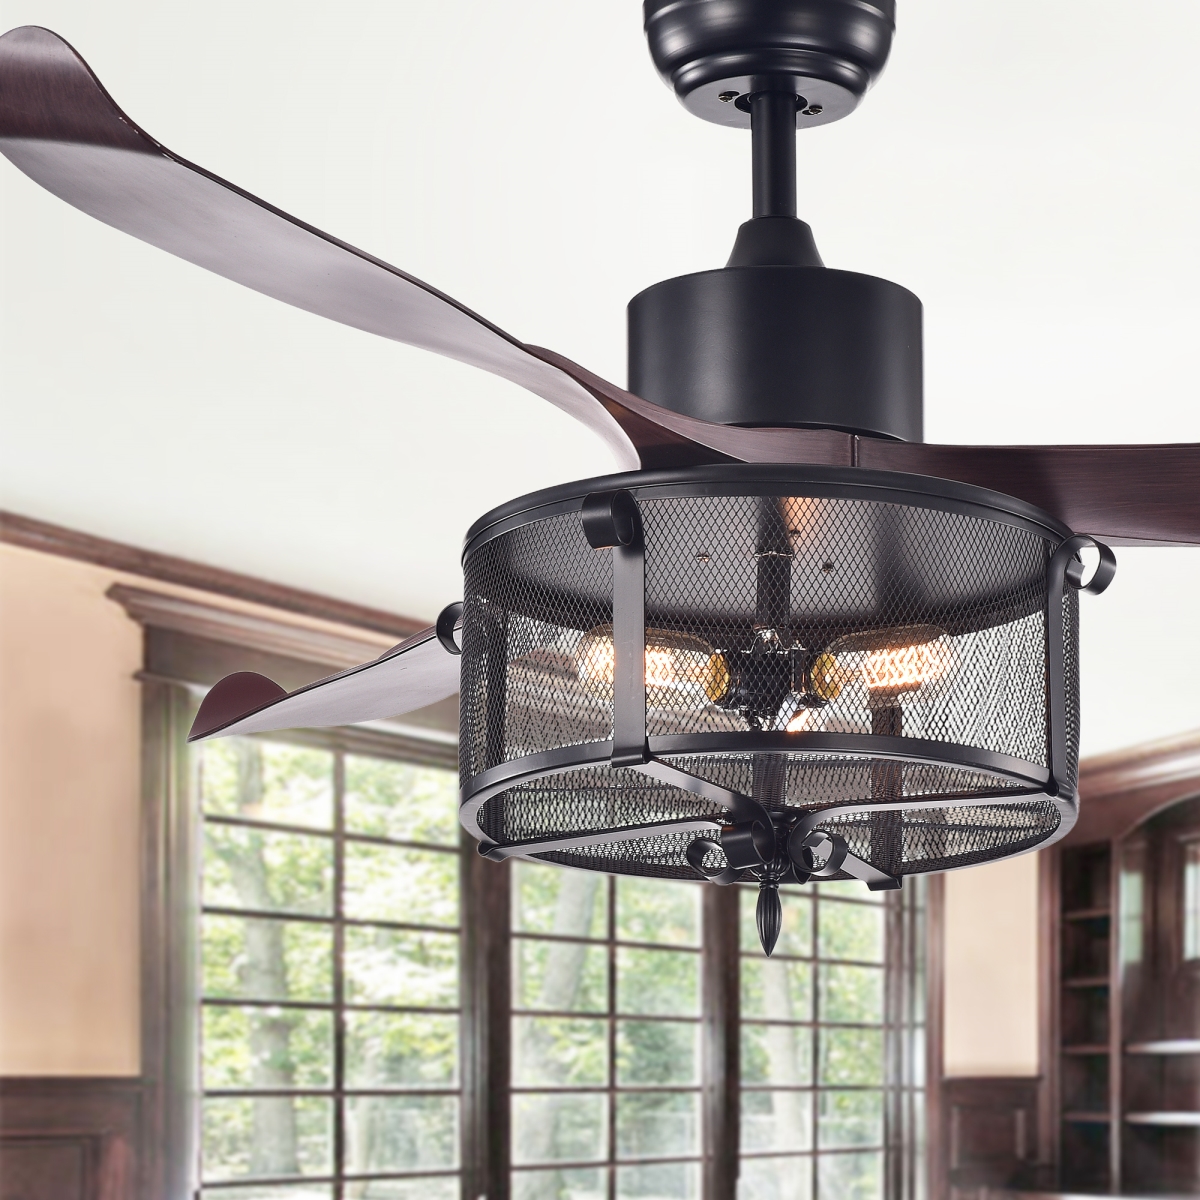 Cfl-8406remo-bl 55 In. Faegan Lighted Ceiling Fan With Caged 3-light Edison Lamp, Matte Black